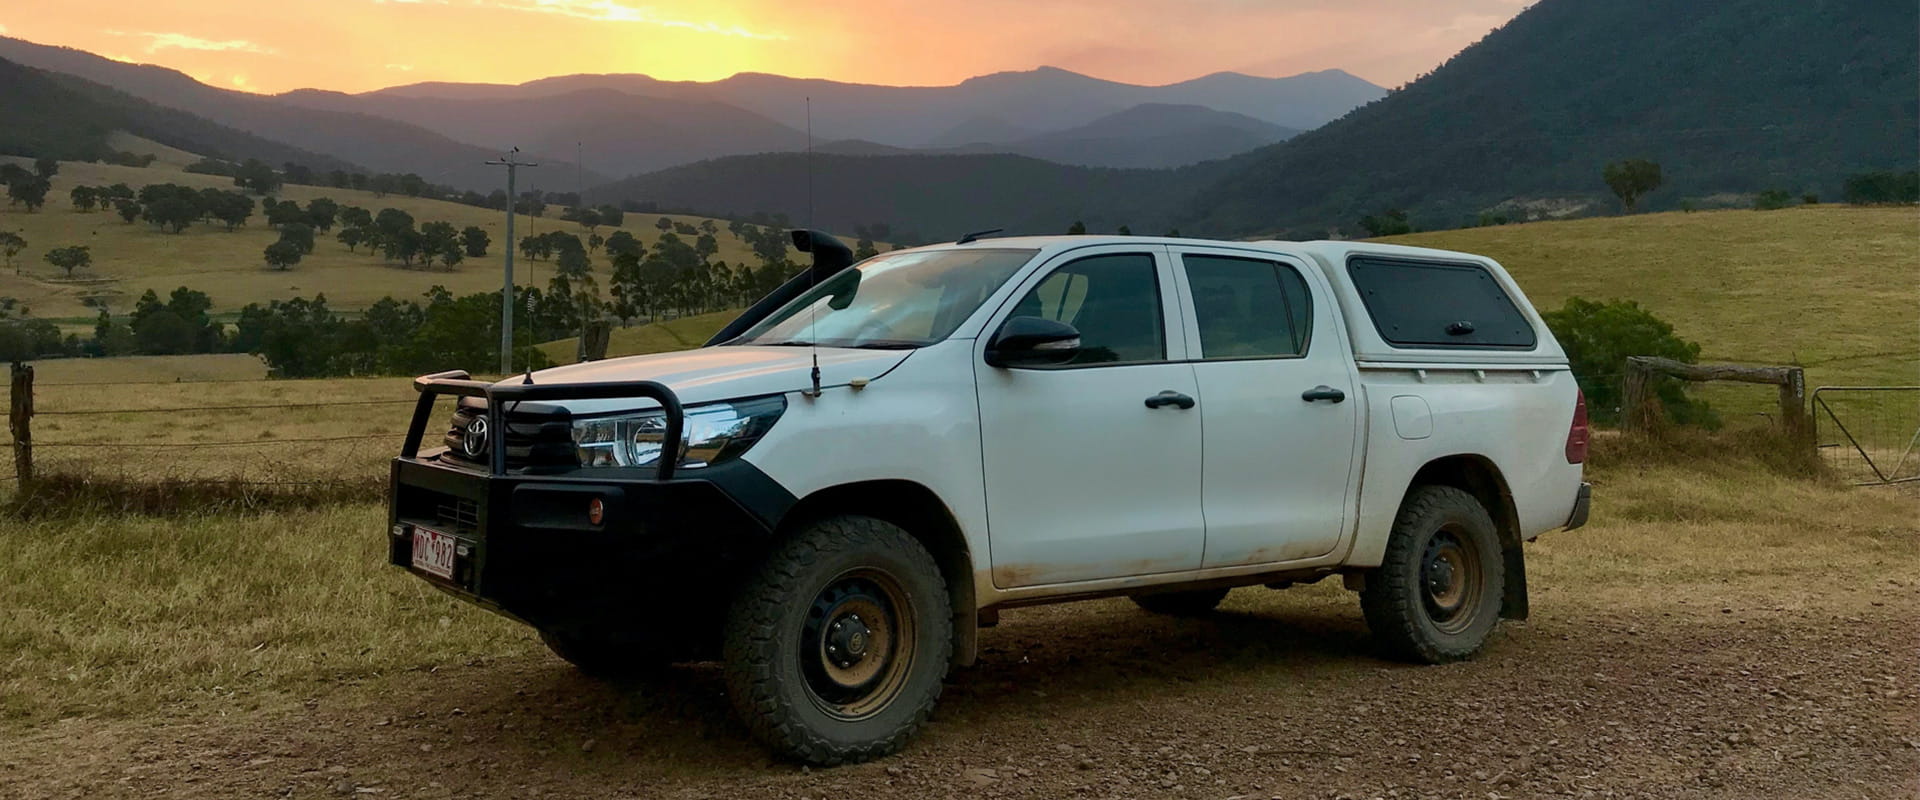 A Four Wheel Drive sits on a dirt track with a sunset highlighting the mountains in the background.